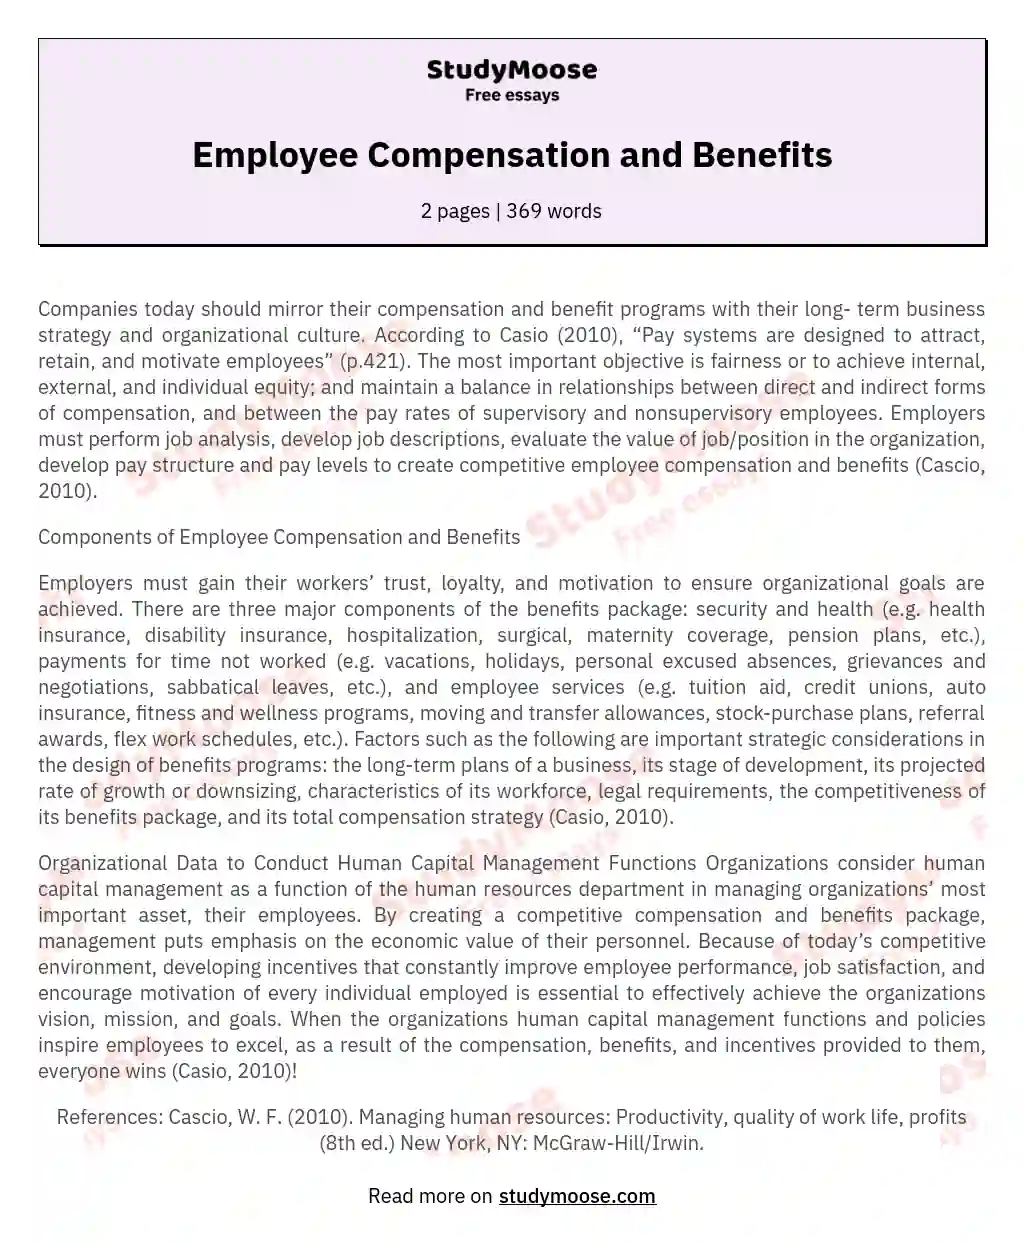 Employee Compensation and Benefits essay